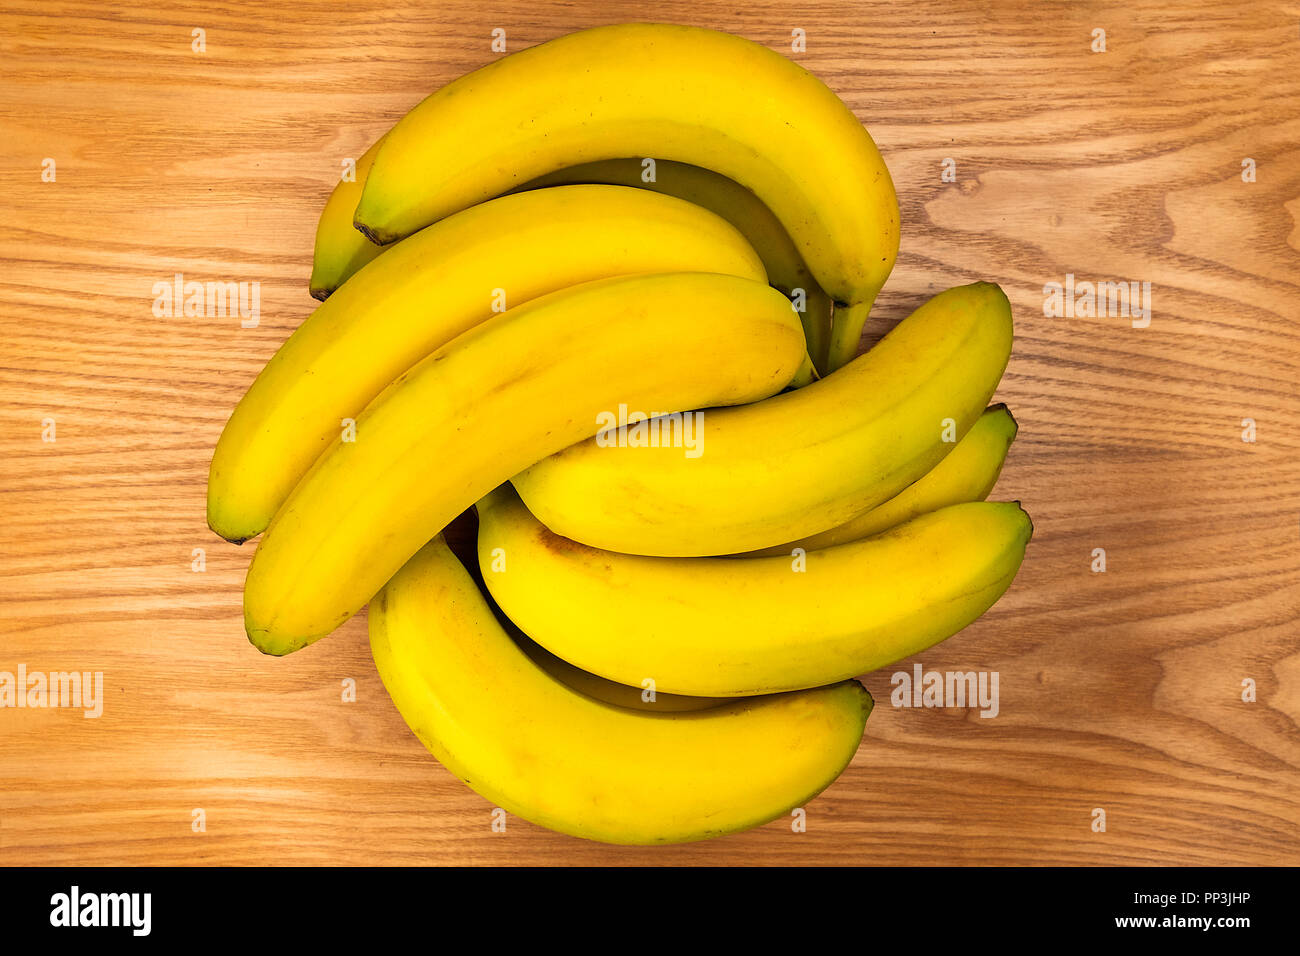 bananas over an wooden plate Stock Photo